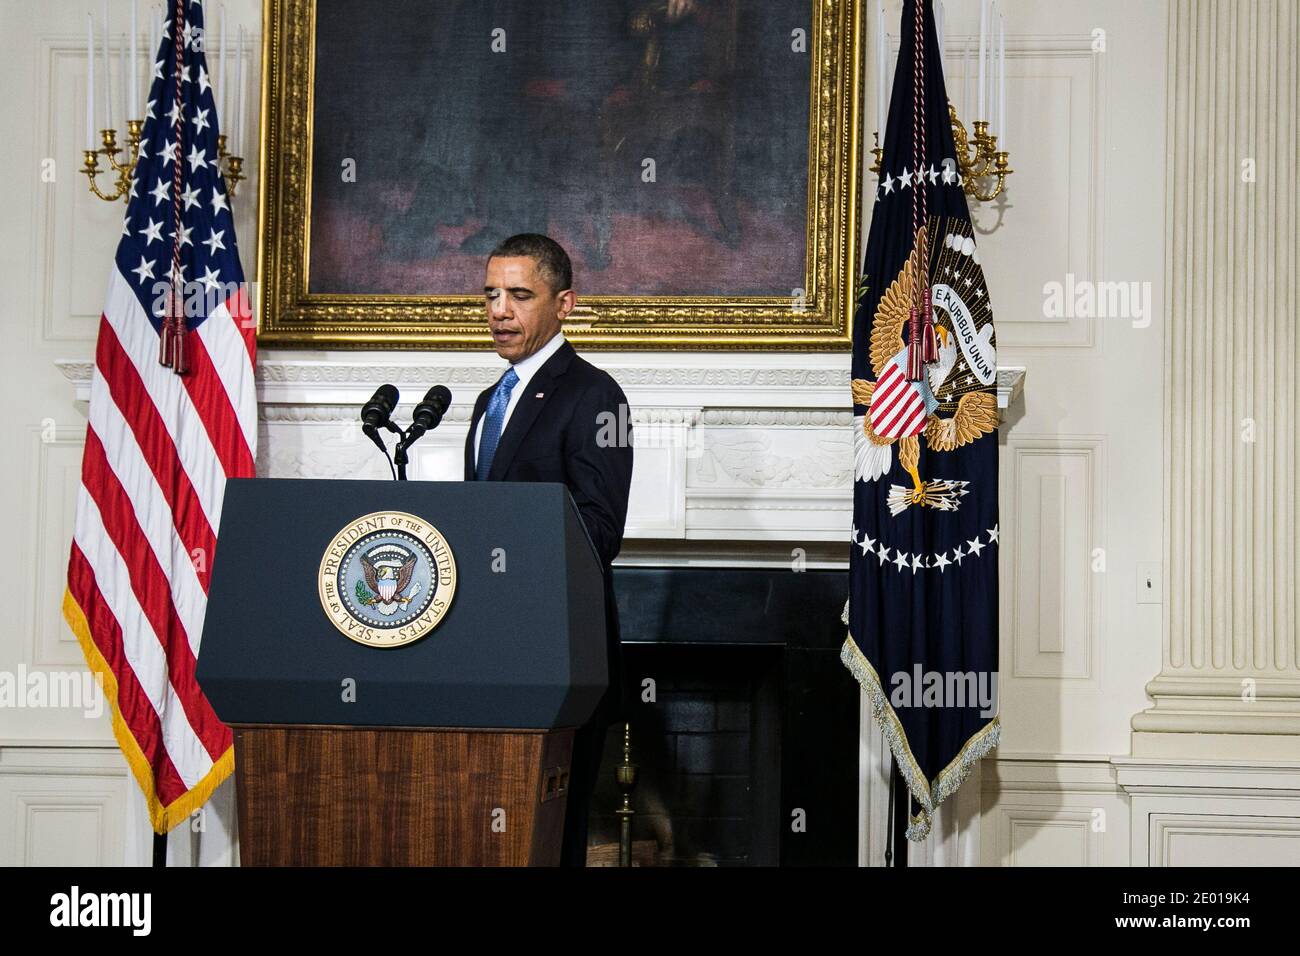 President Barack Obama makes a statement announcing an interim agreement on Iranian nuclear power that was reached in negotiations between Iran and six world powers, from the State Dining Room at the White House on Nov. 23, 2013 in Washington, DC, USA. A major sticking point in the negotiations has been Iran's insistence on it's right to enrich uranium. Photo by T.J. Kirkpatrick/Pool/ABACAPRESS.COM Stock Photo